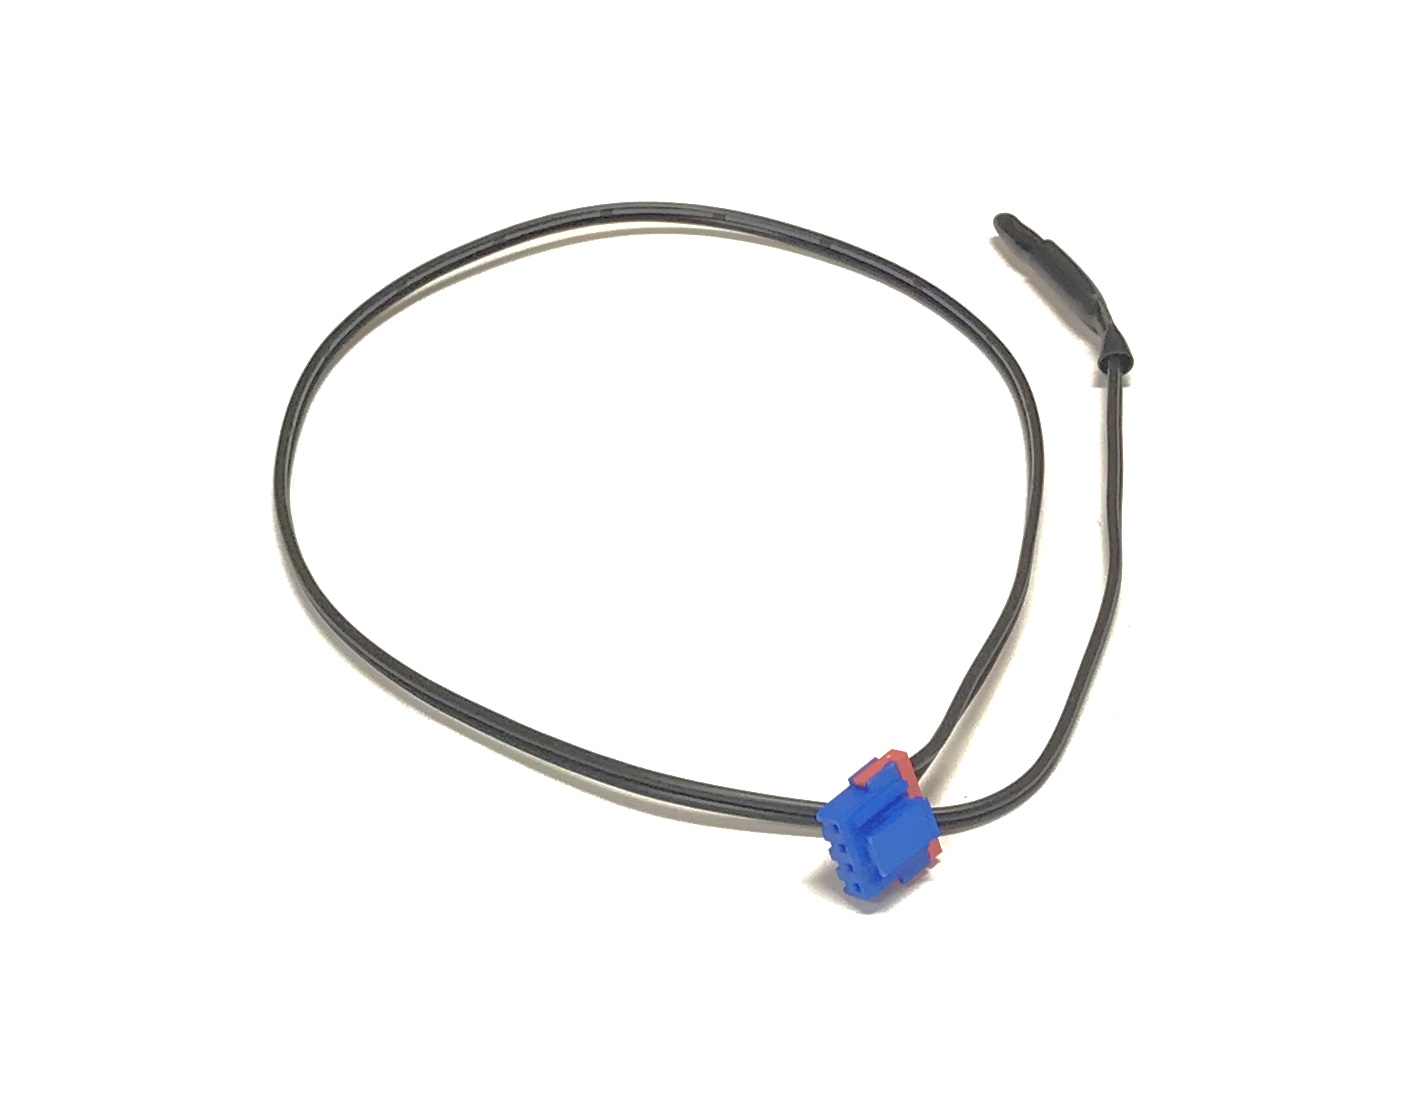 LG Air Conditioner AC Thermistor Shipped With LW1812HR, HBLG2400R, LWX123CGMK1